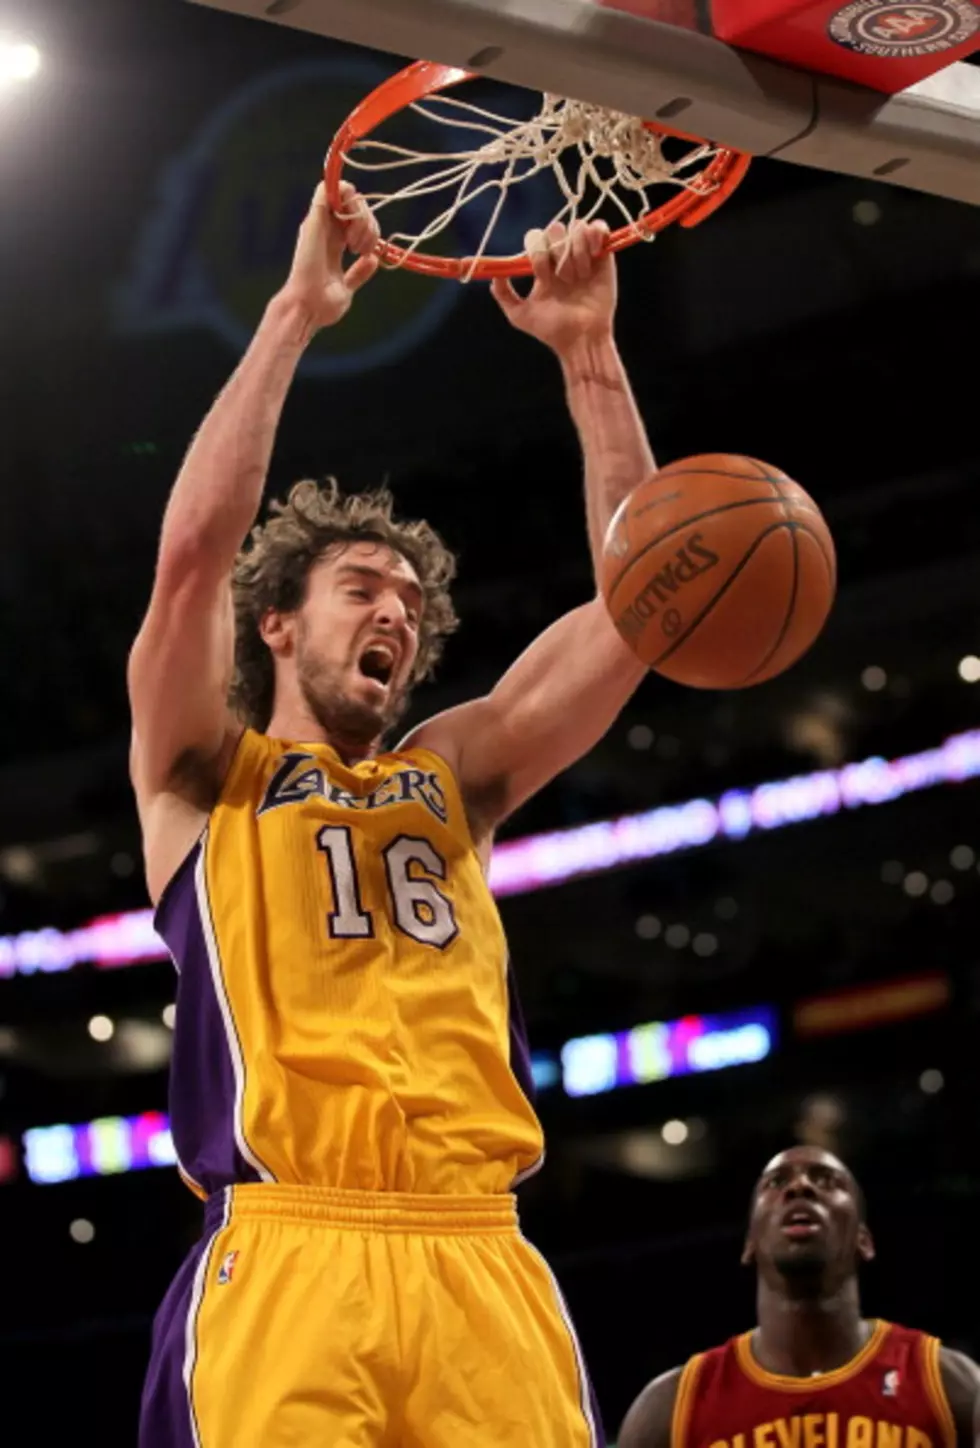 Pic Of The Day – Pau Can Dunk [PHOTO]